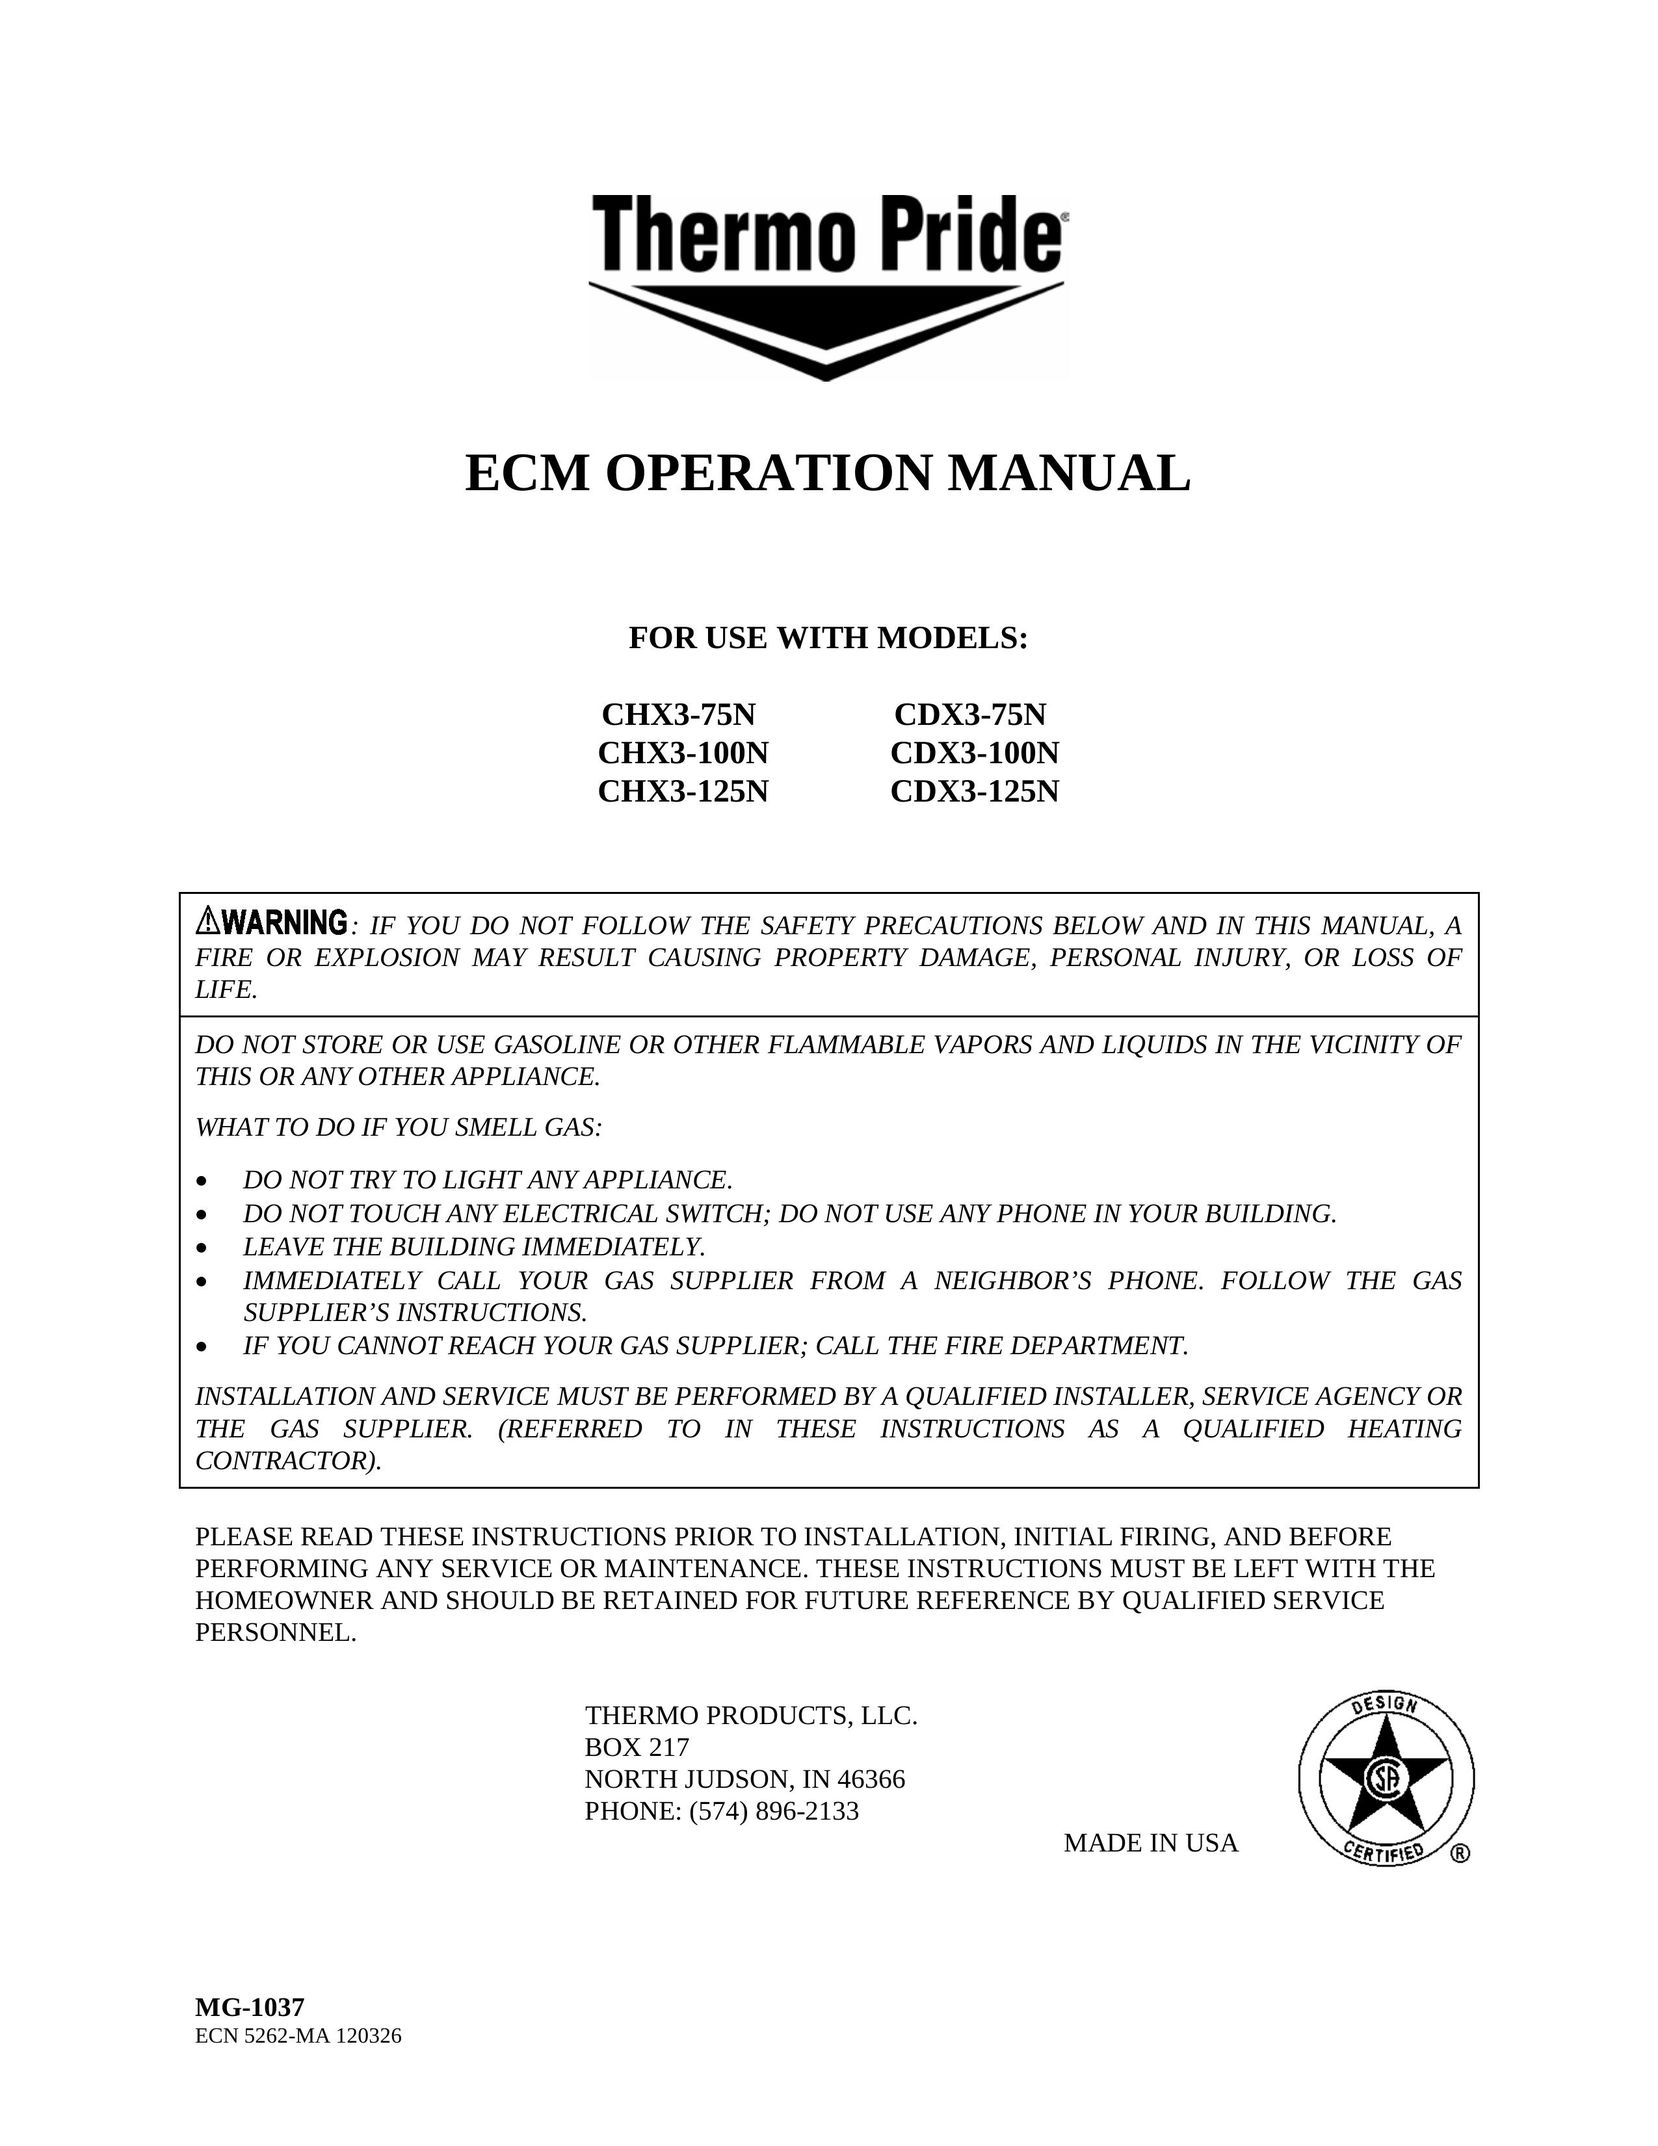 Thermo Products CDX3-75N Furnace User Manual